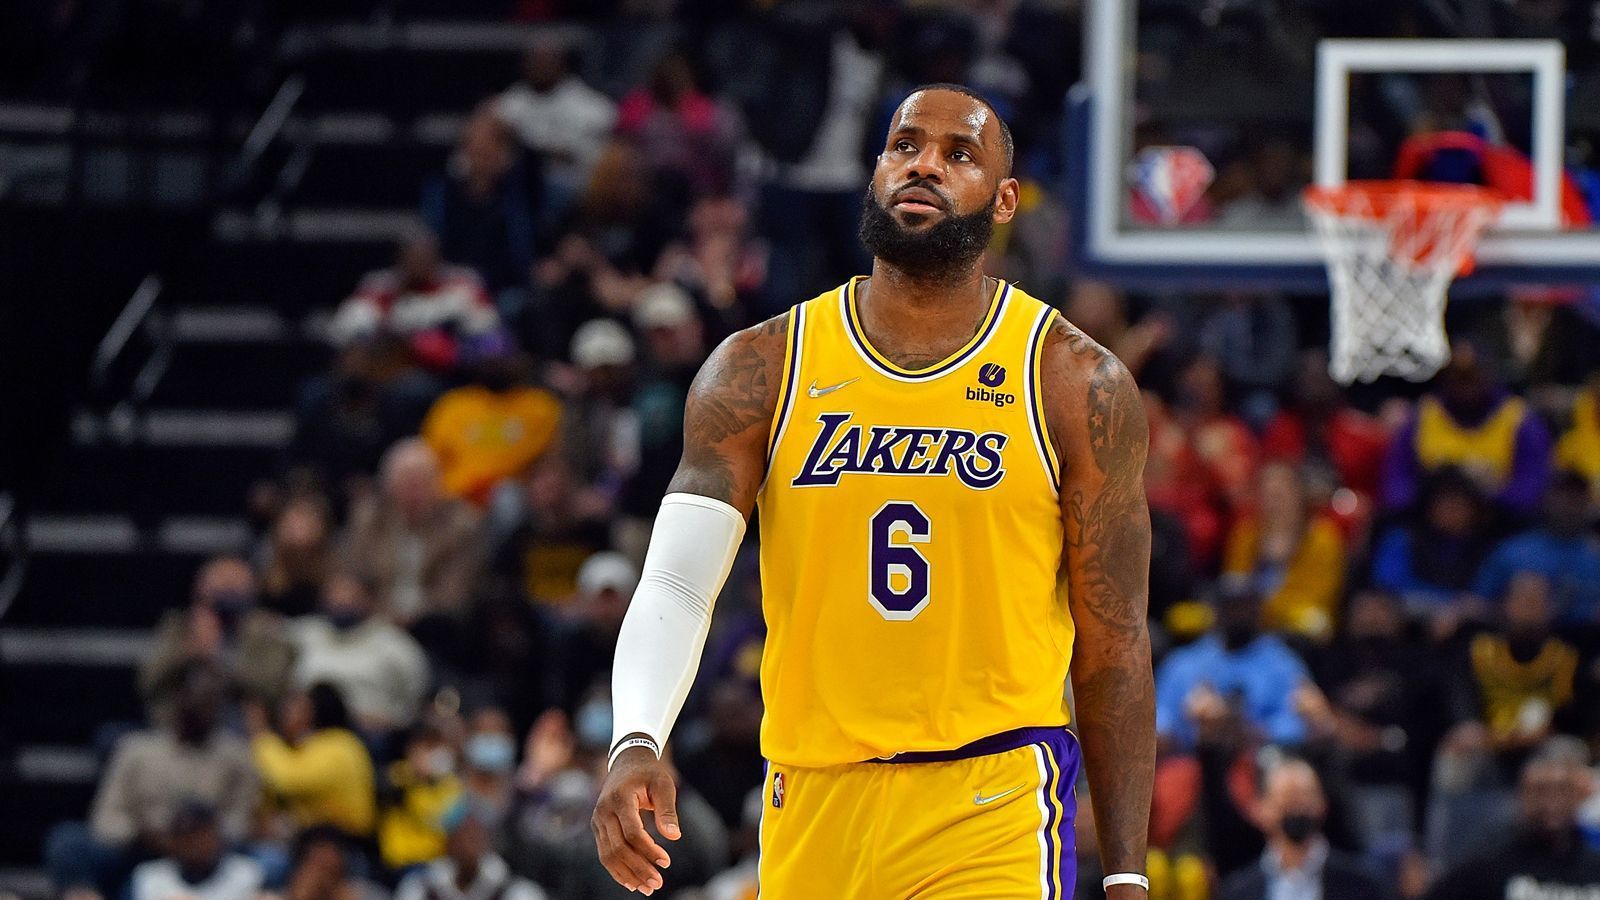 
                <strong>1. Platz: LeBron James (Los Angeles Lakers)</strong><br>
                &#x2022; 34 Spiele -<br>&#x2022; 28,9 Punkte pro Spiel -<br>&#x2022; 7,6 Rebounds pro Spiel -<br>&#x2022; 6,4 Assists pro Spiel -<br>&#x2022; 36,2% Dreierquote -<br>
              